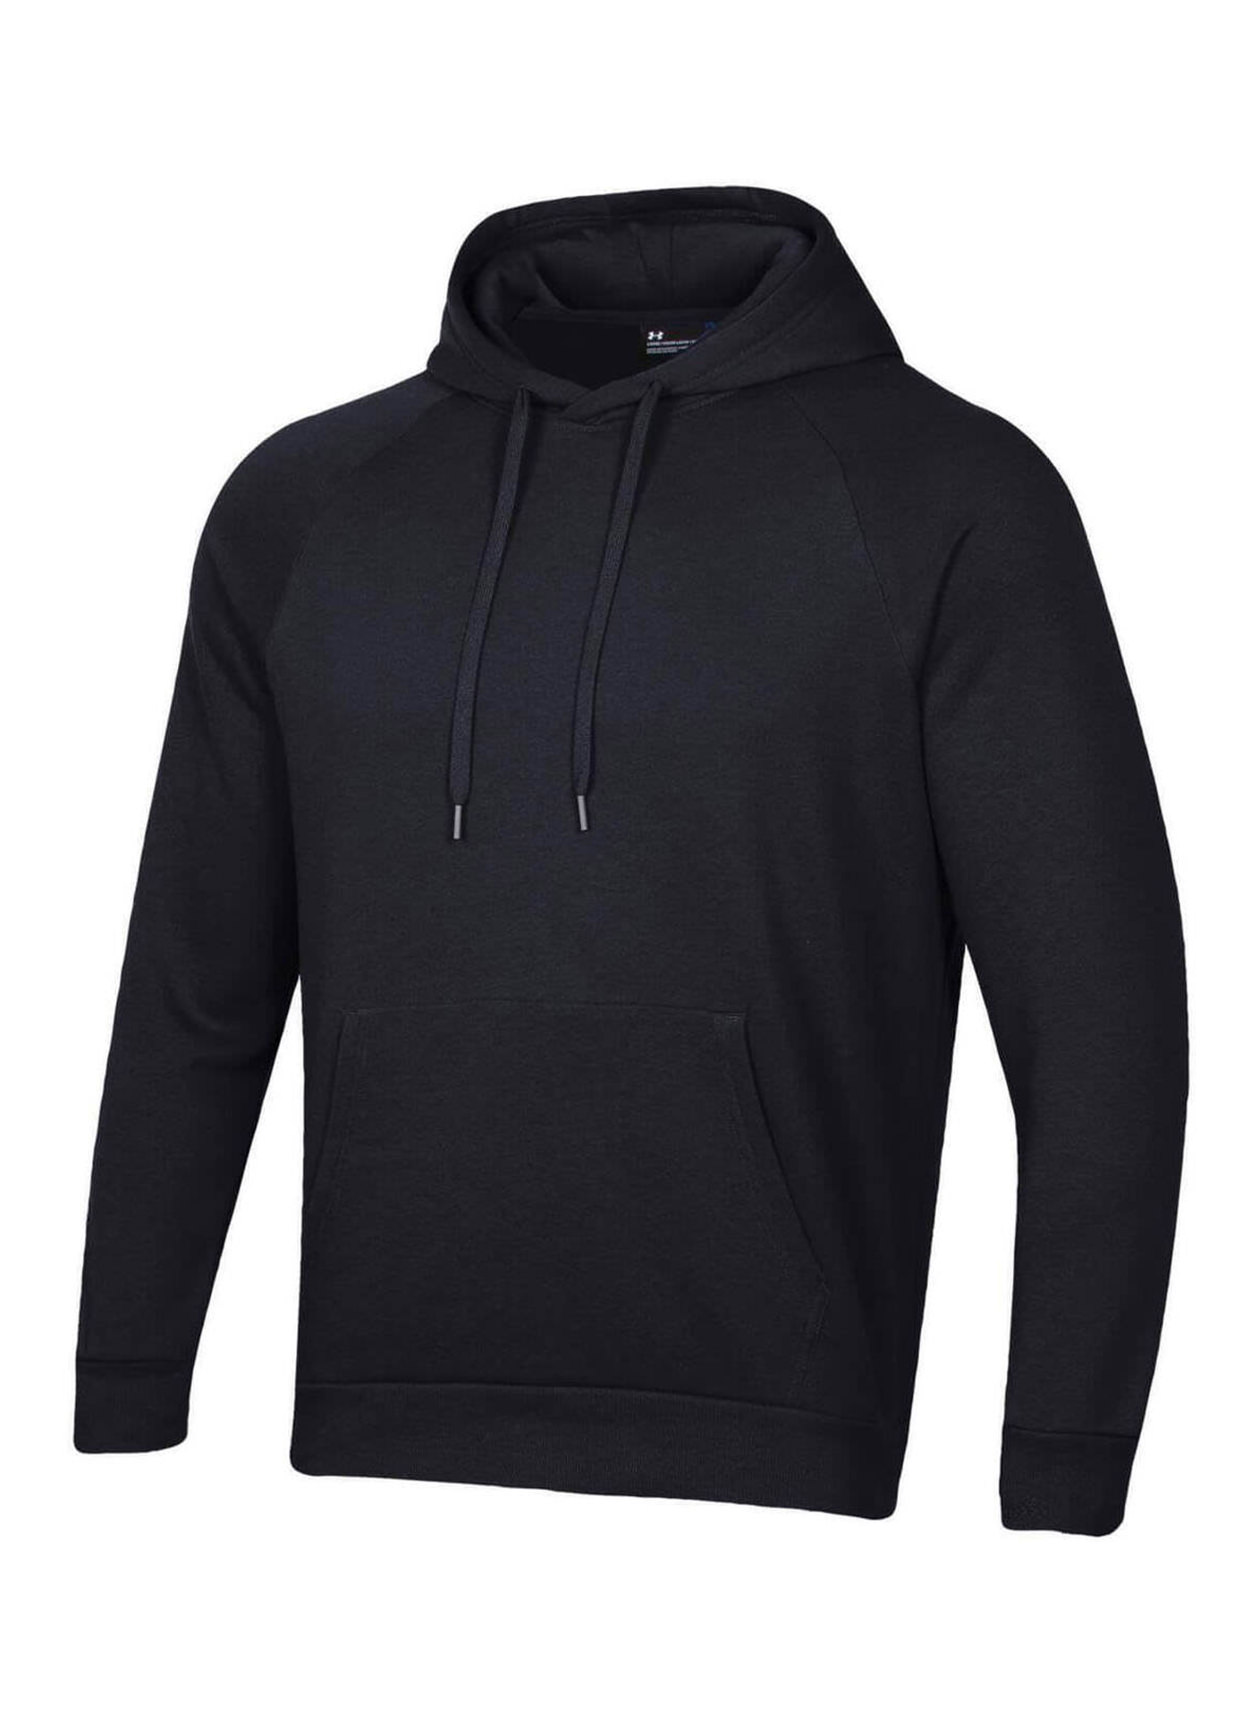 Under Armour Men's Black All Day Hoodie